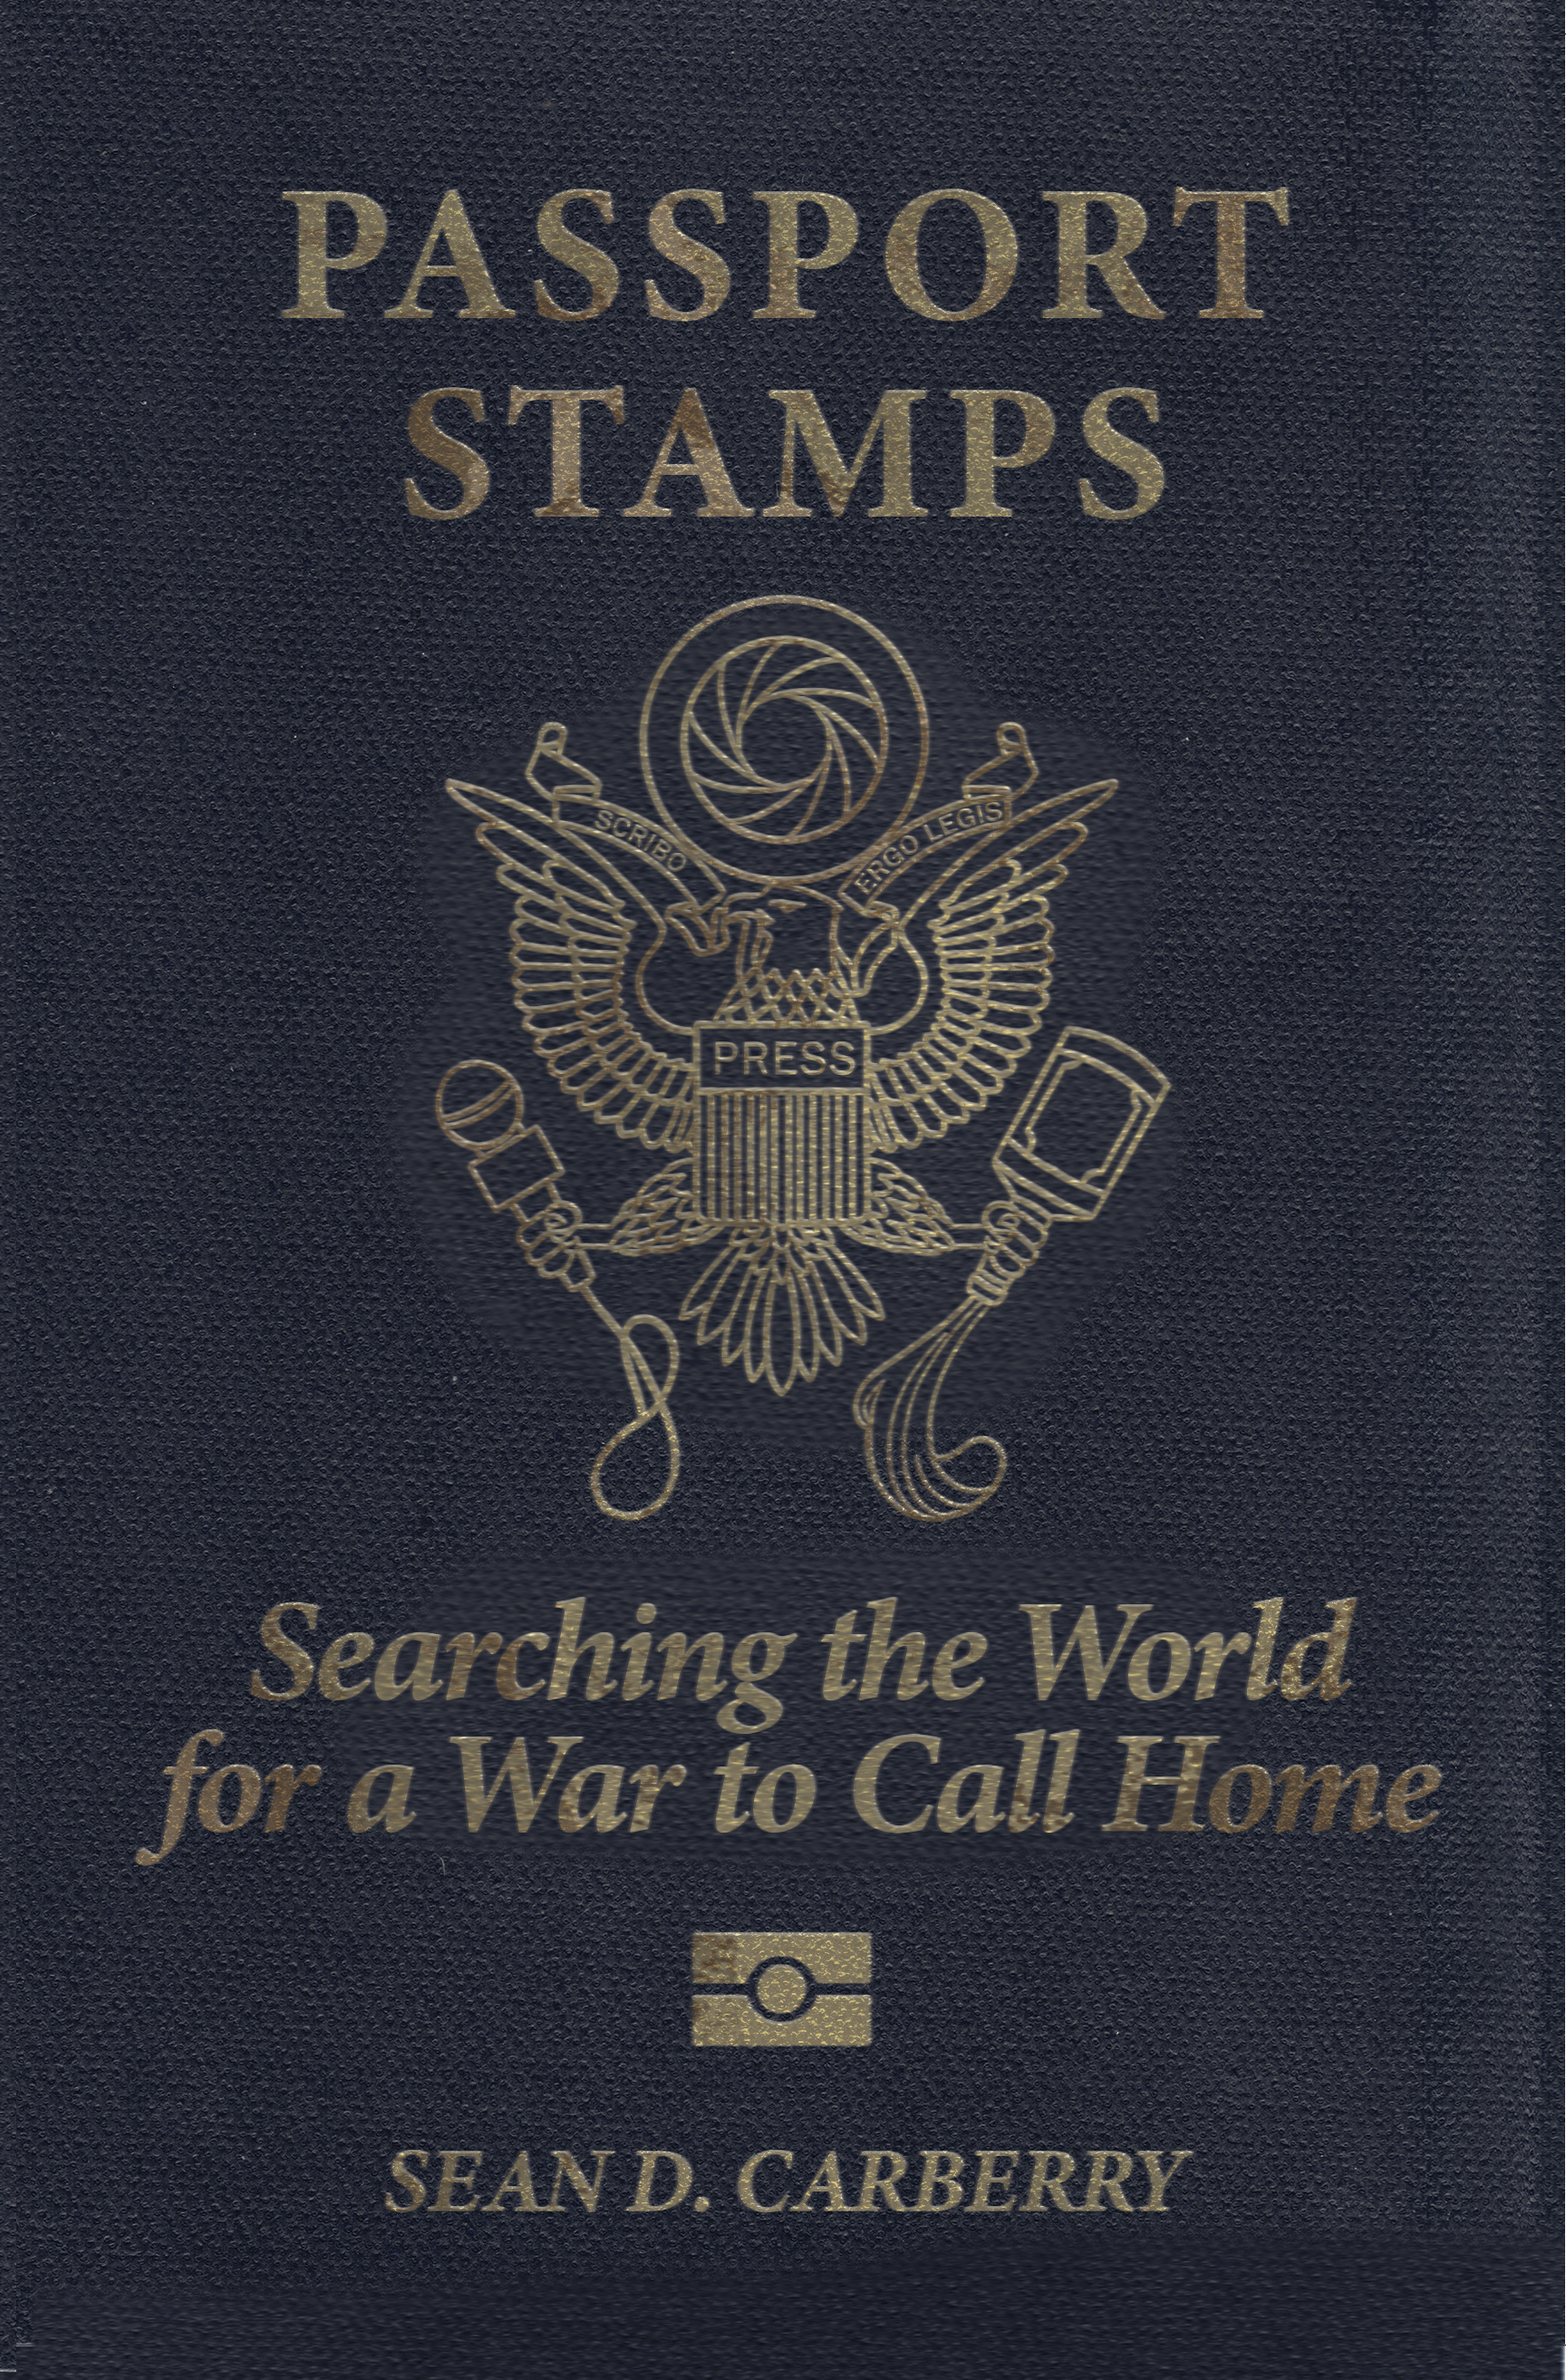 Book cover resembling a passport reading Passport Stamps: Searching the World for a War to Call Home by Sean D. Carberry and a modified seal showing an eagle clutching a microphone and a bottle